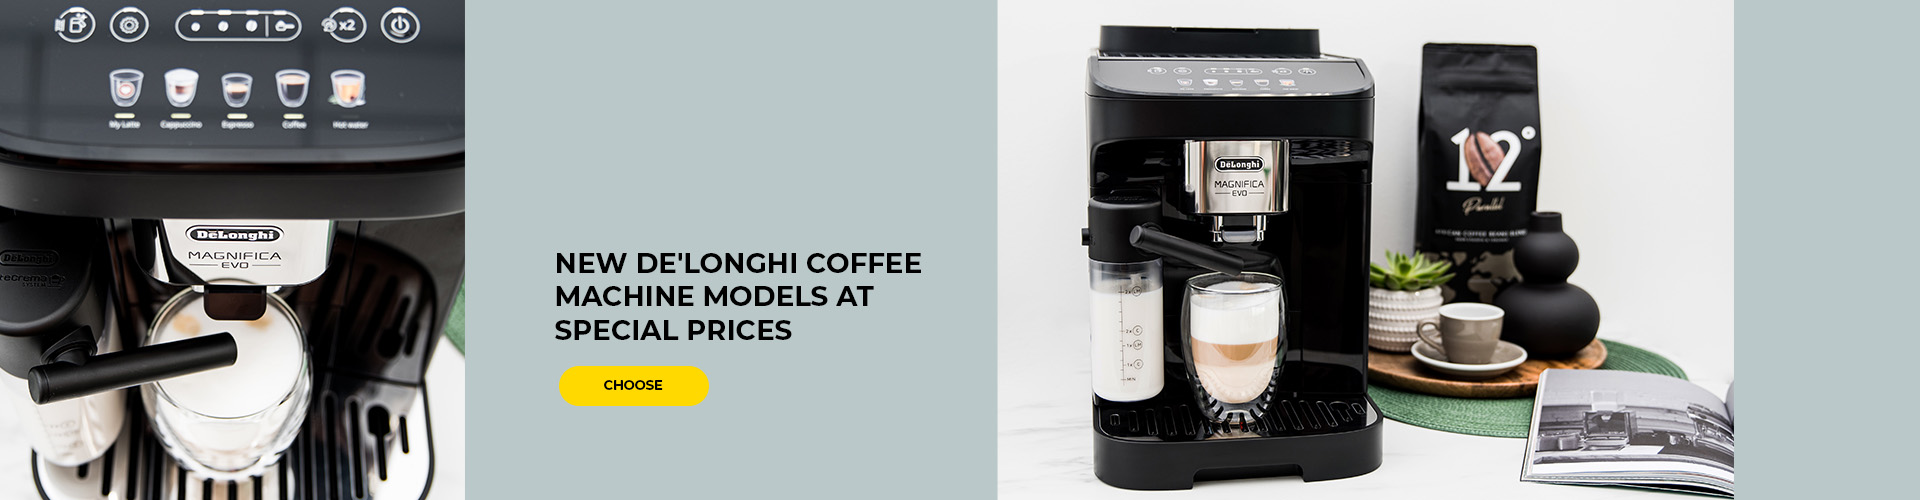 New De'Longhi coffee machine models at special prices